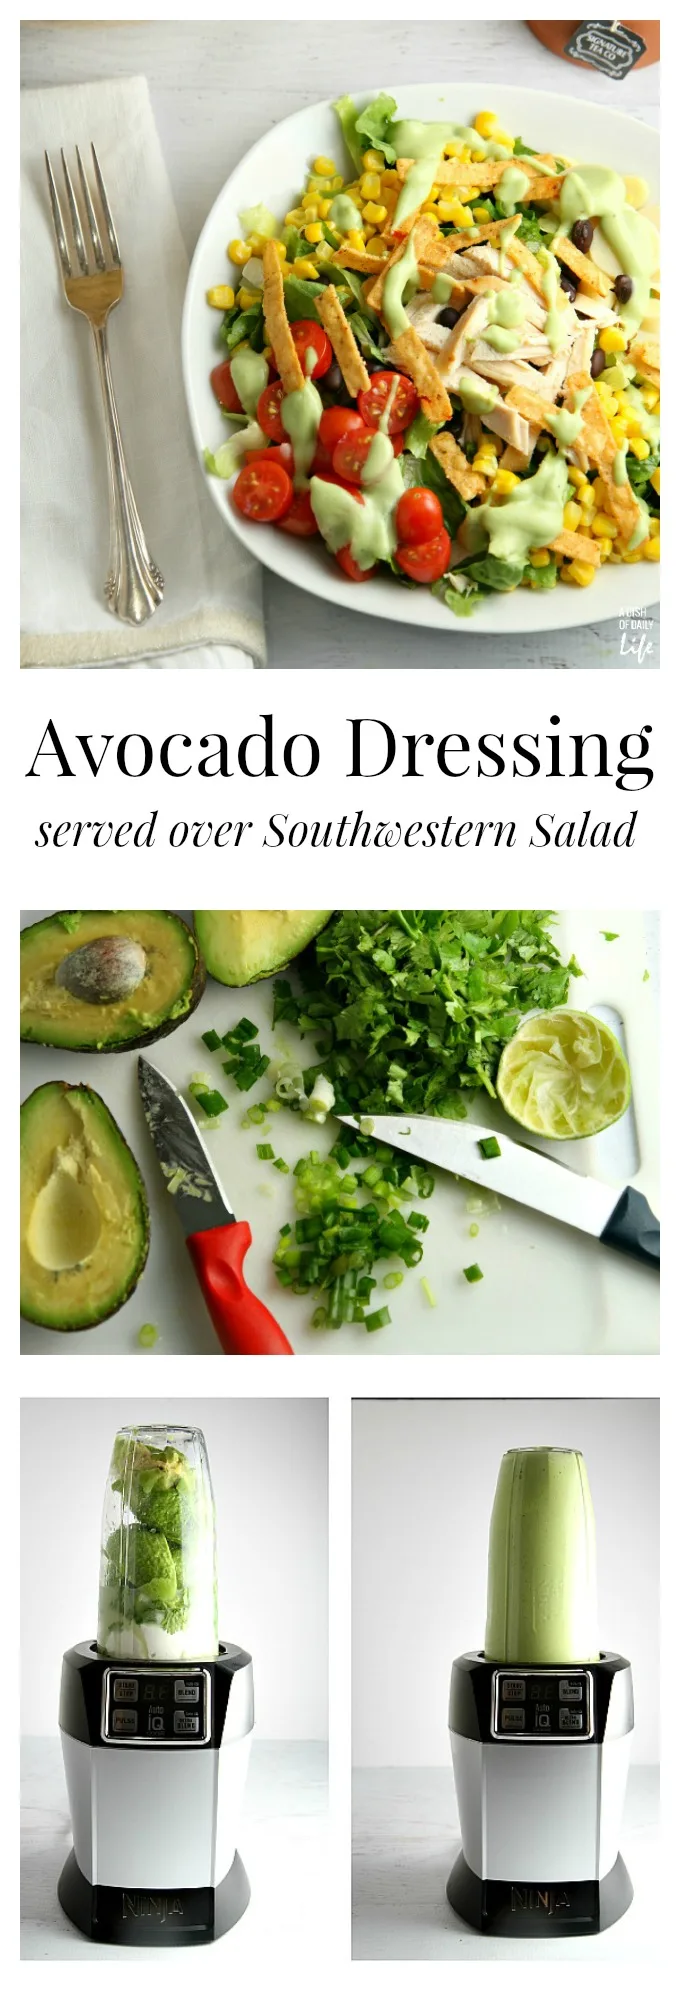 This Avocado Dressing is quite versatile...use it as a dip for vegetables, slather it on a sandwich or use it as a salad dressing! Shown with a Southwestern style salad, this is a great way to use up your leftover Thanksgiving turkey or a rotisserie chicken. 